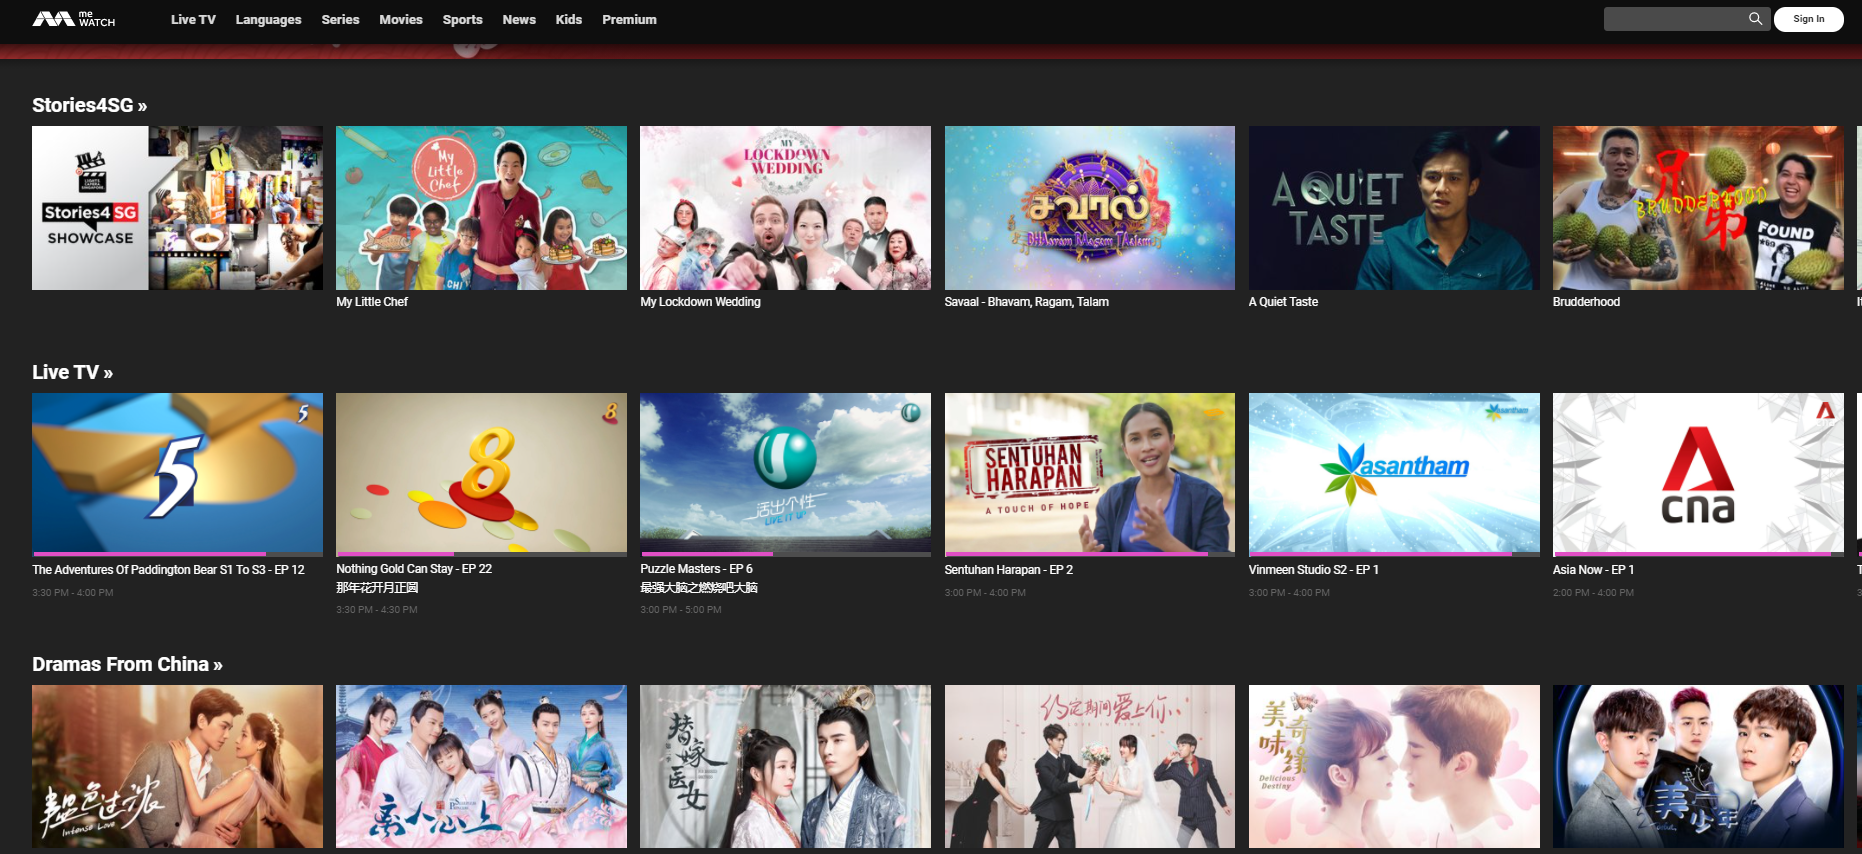 MediaCorp rebranded its digital video-on-demand service Toggle to meWATCH, which streams television programmes and films. 